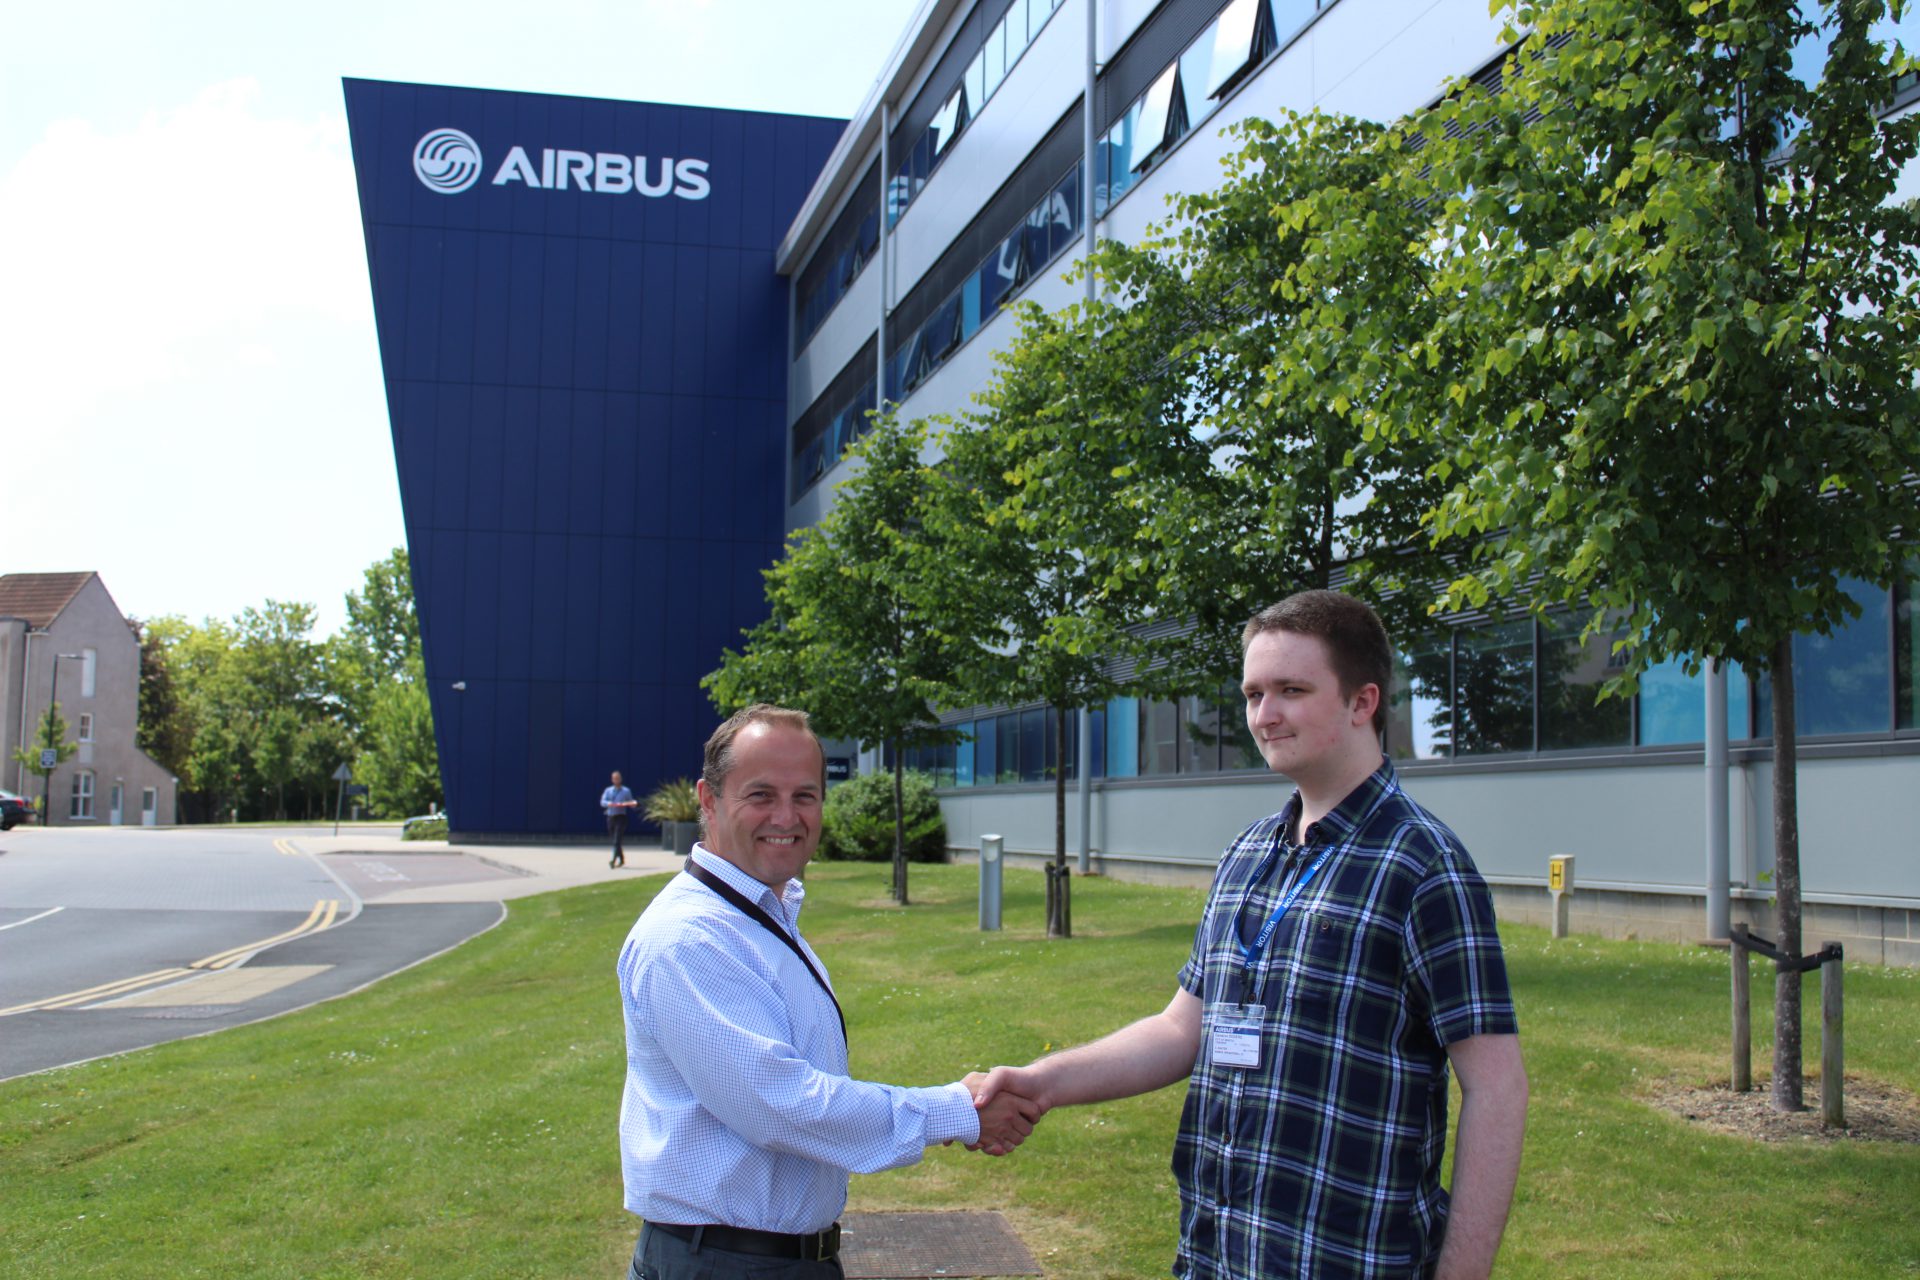 Cameron Sidders, student, shakes hands with David Best, Head of Strategy & Business Development at Airbus